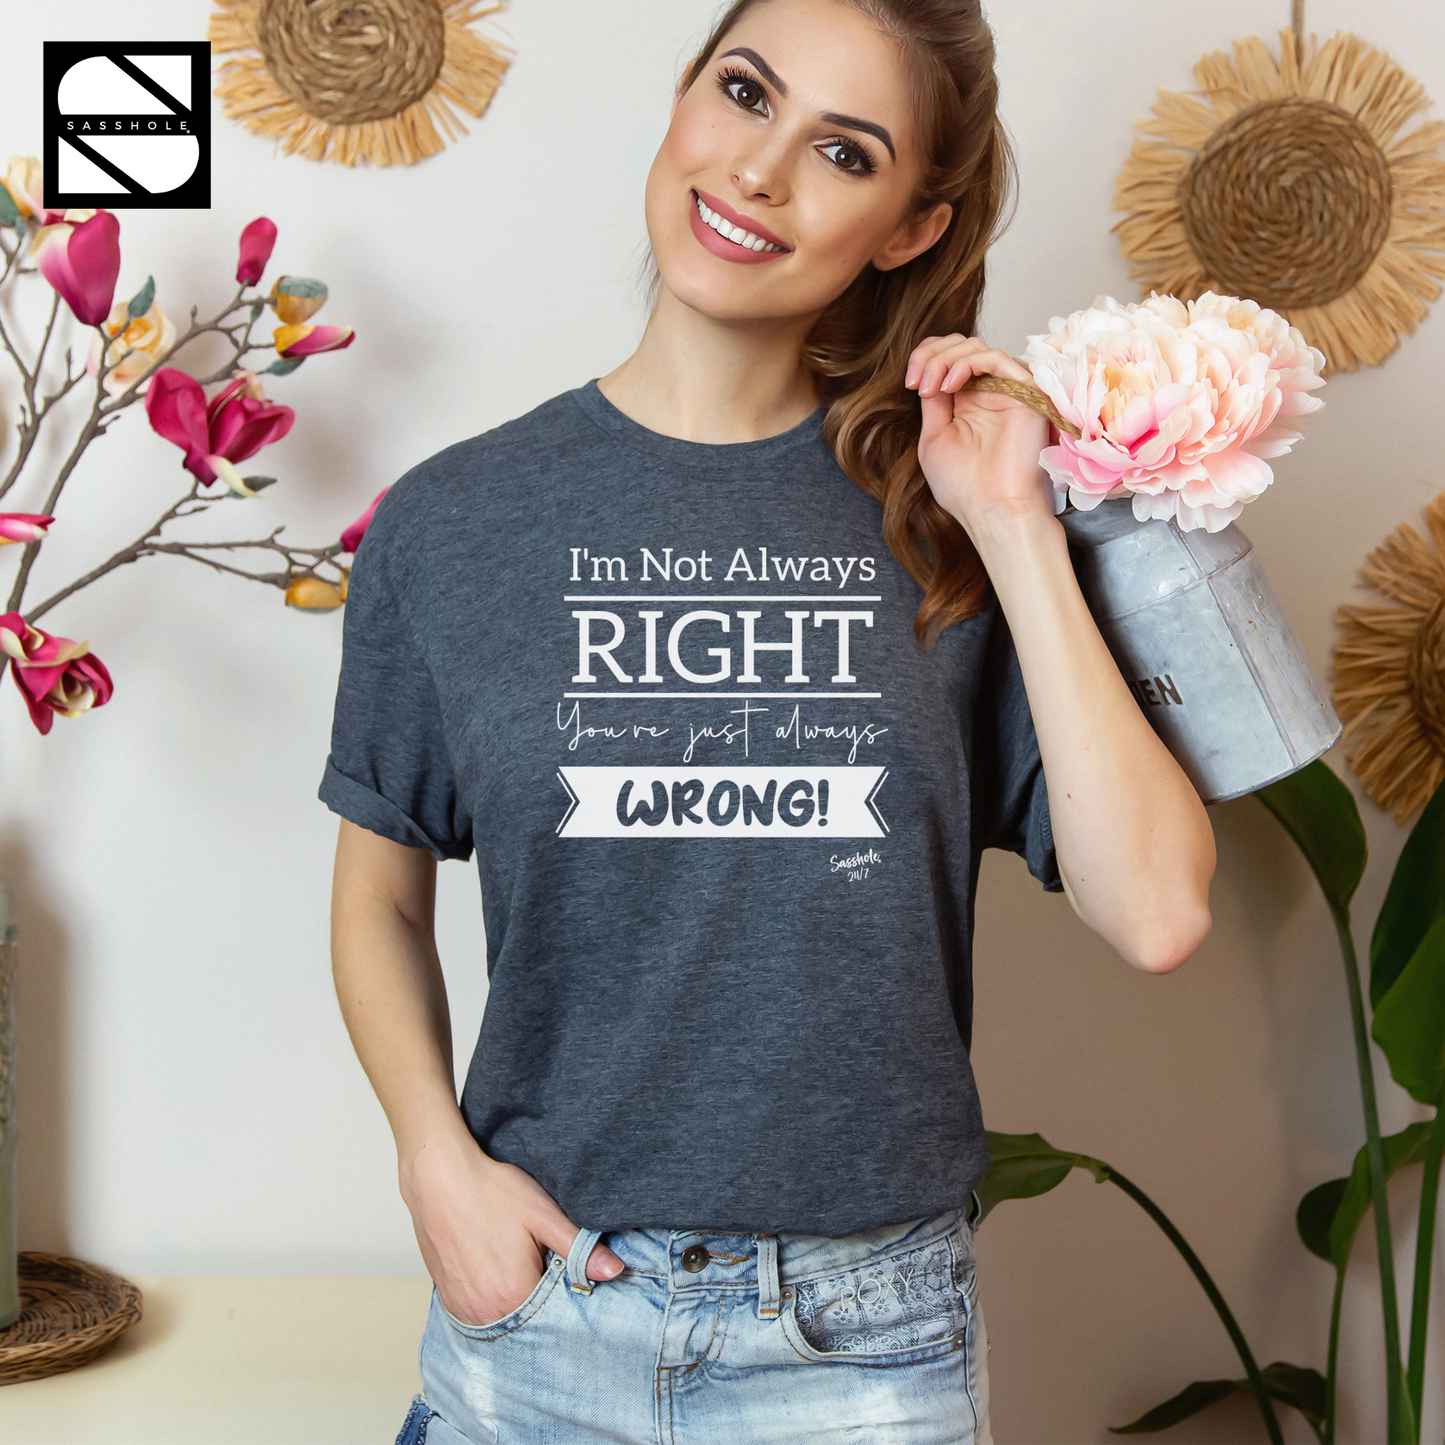 Sasshole® Absolute Tee: Right in a World of Wrong Women's Tshirts